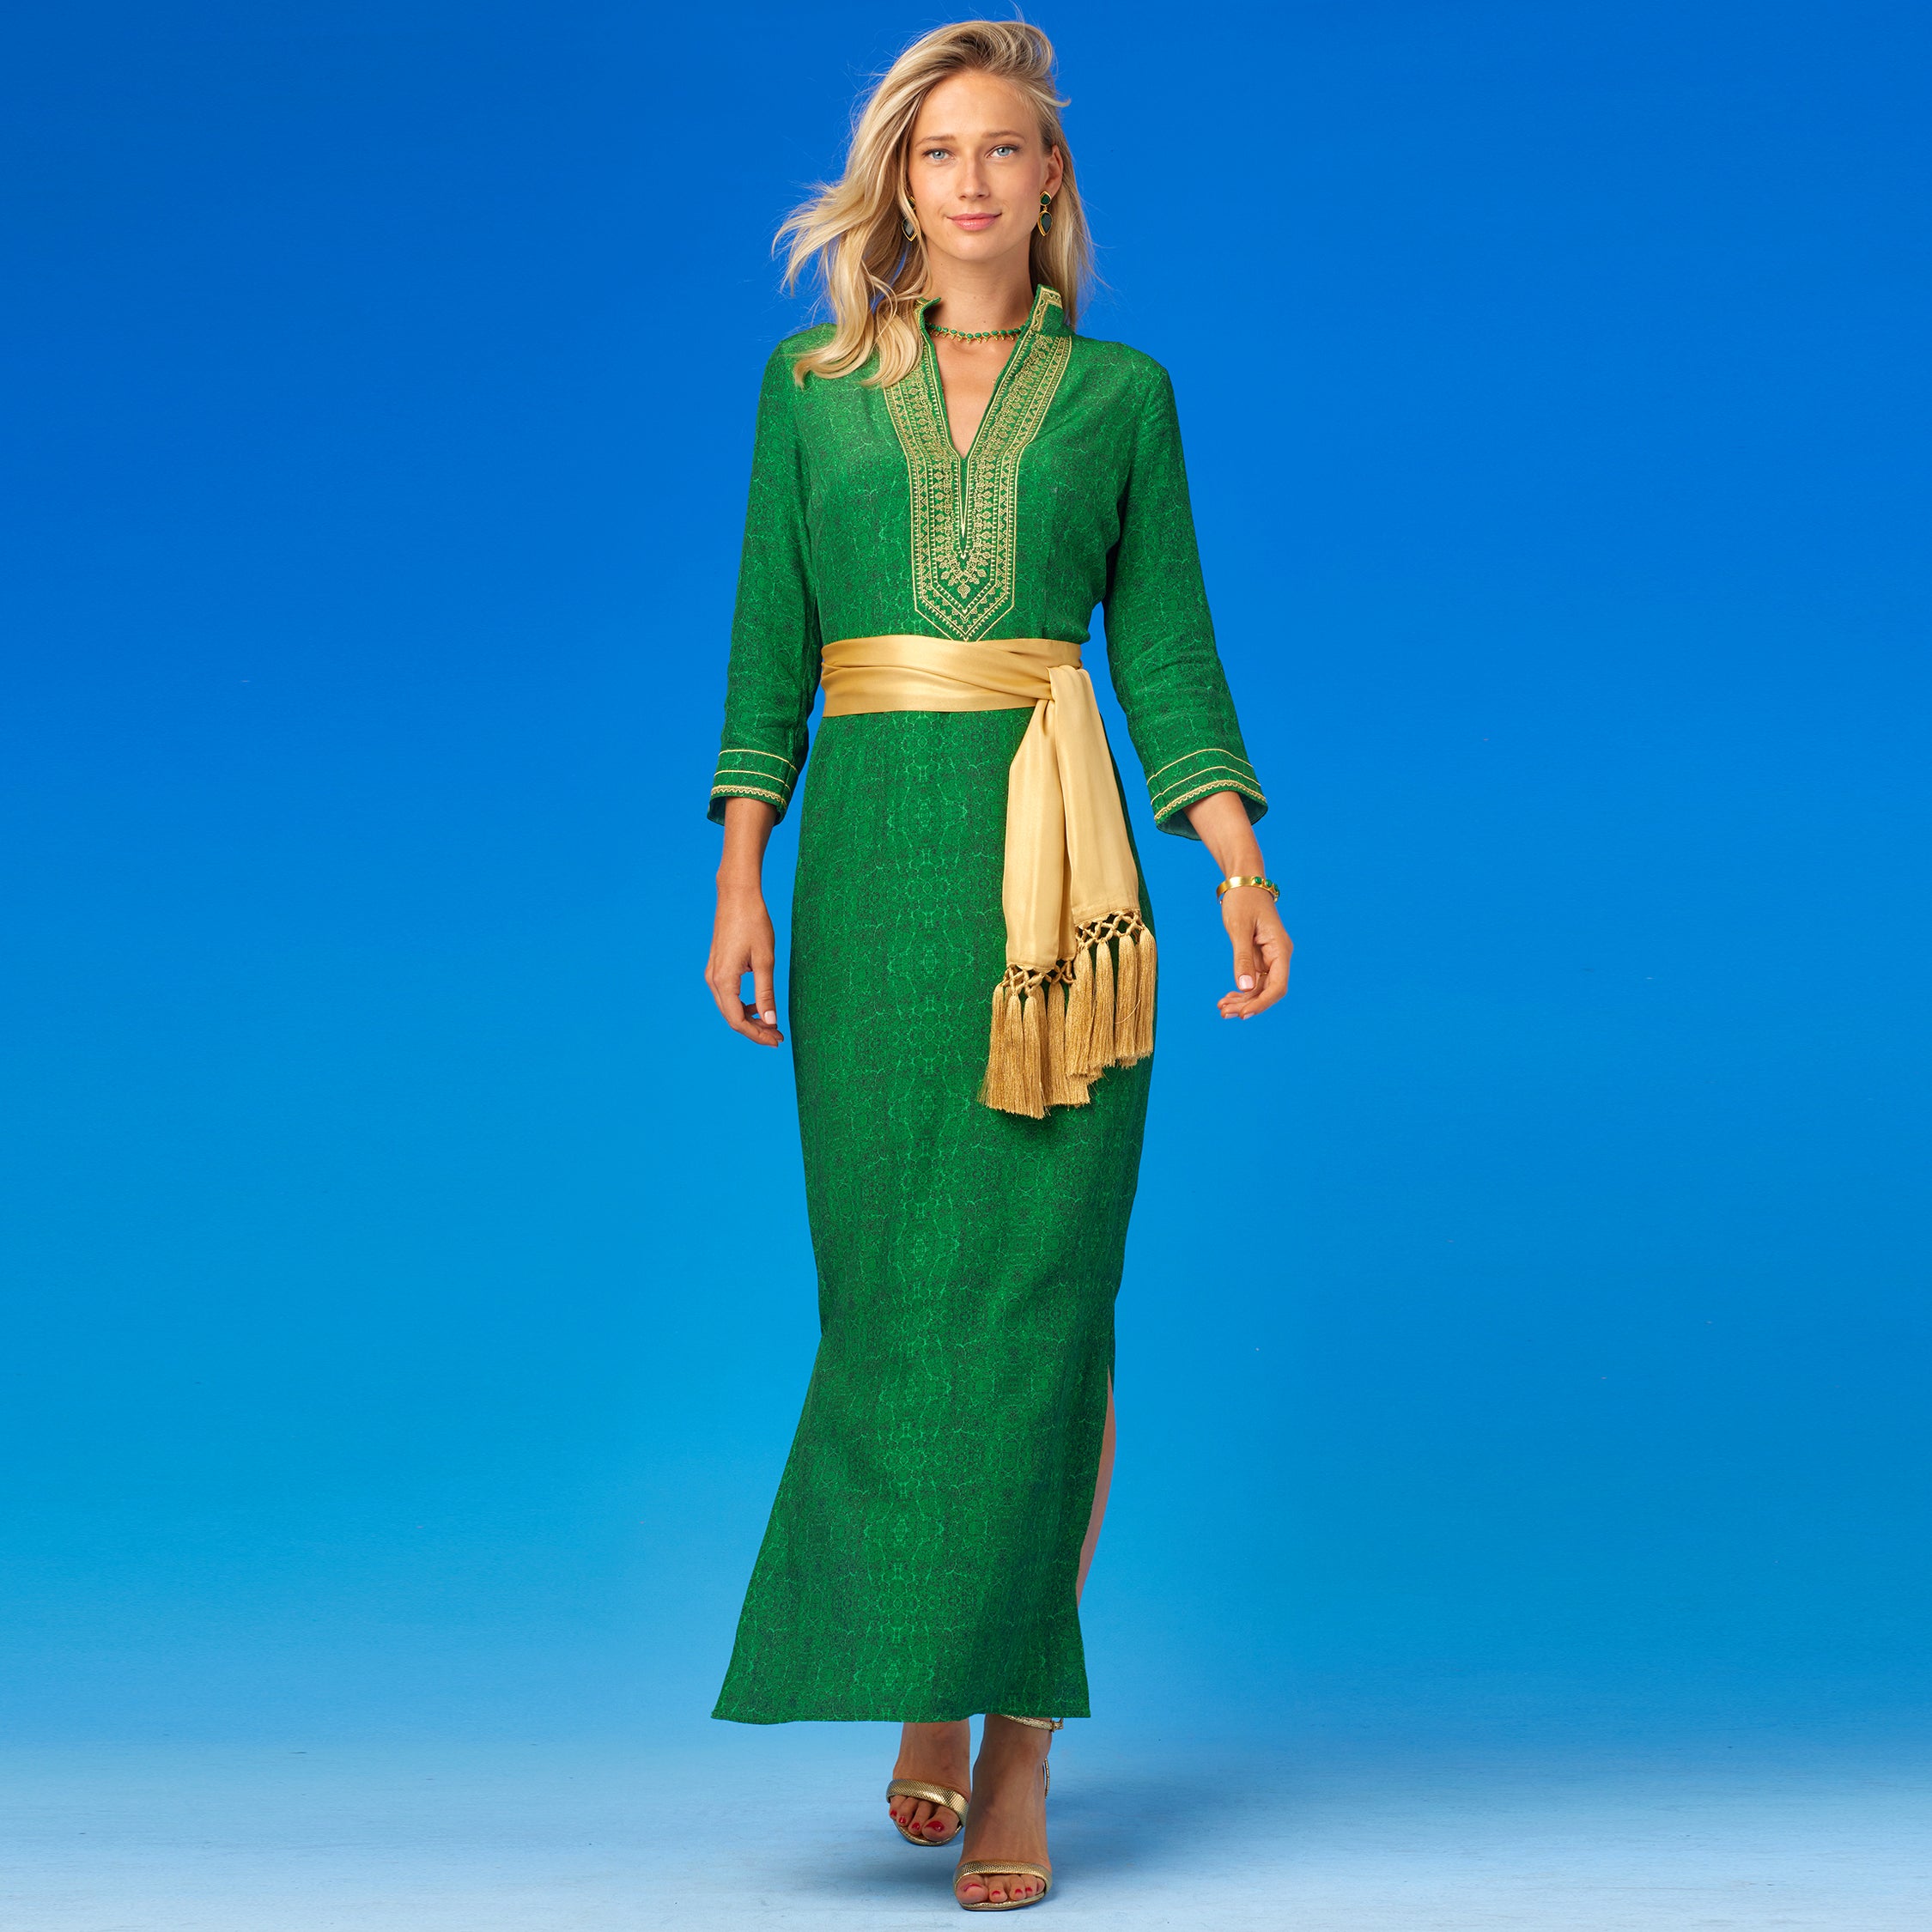 Cosima Sash Belt in Pale Gold Shimmer-Worn with the Isabelle Long Tunic Dress in Malachite Burl